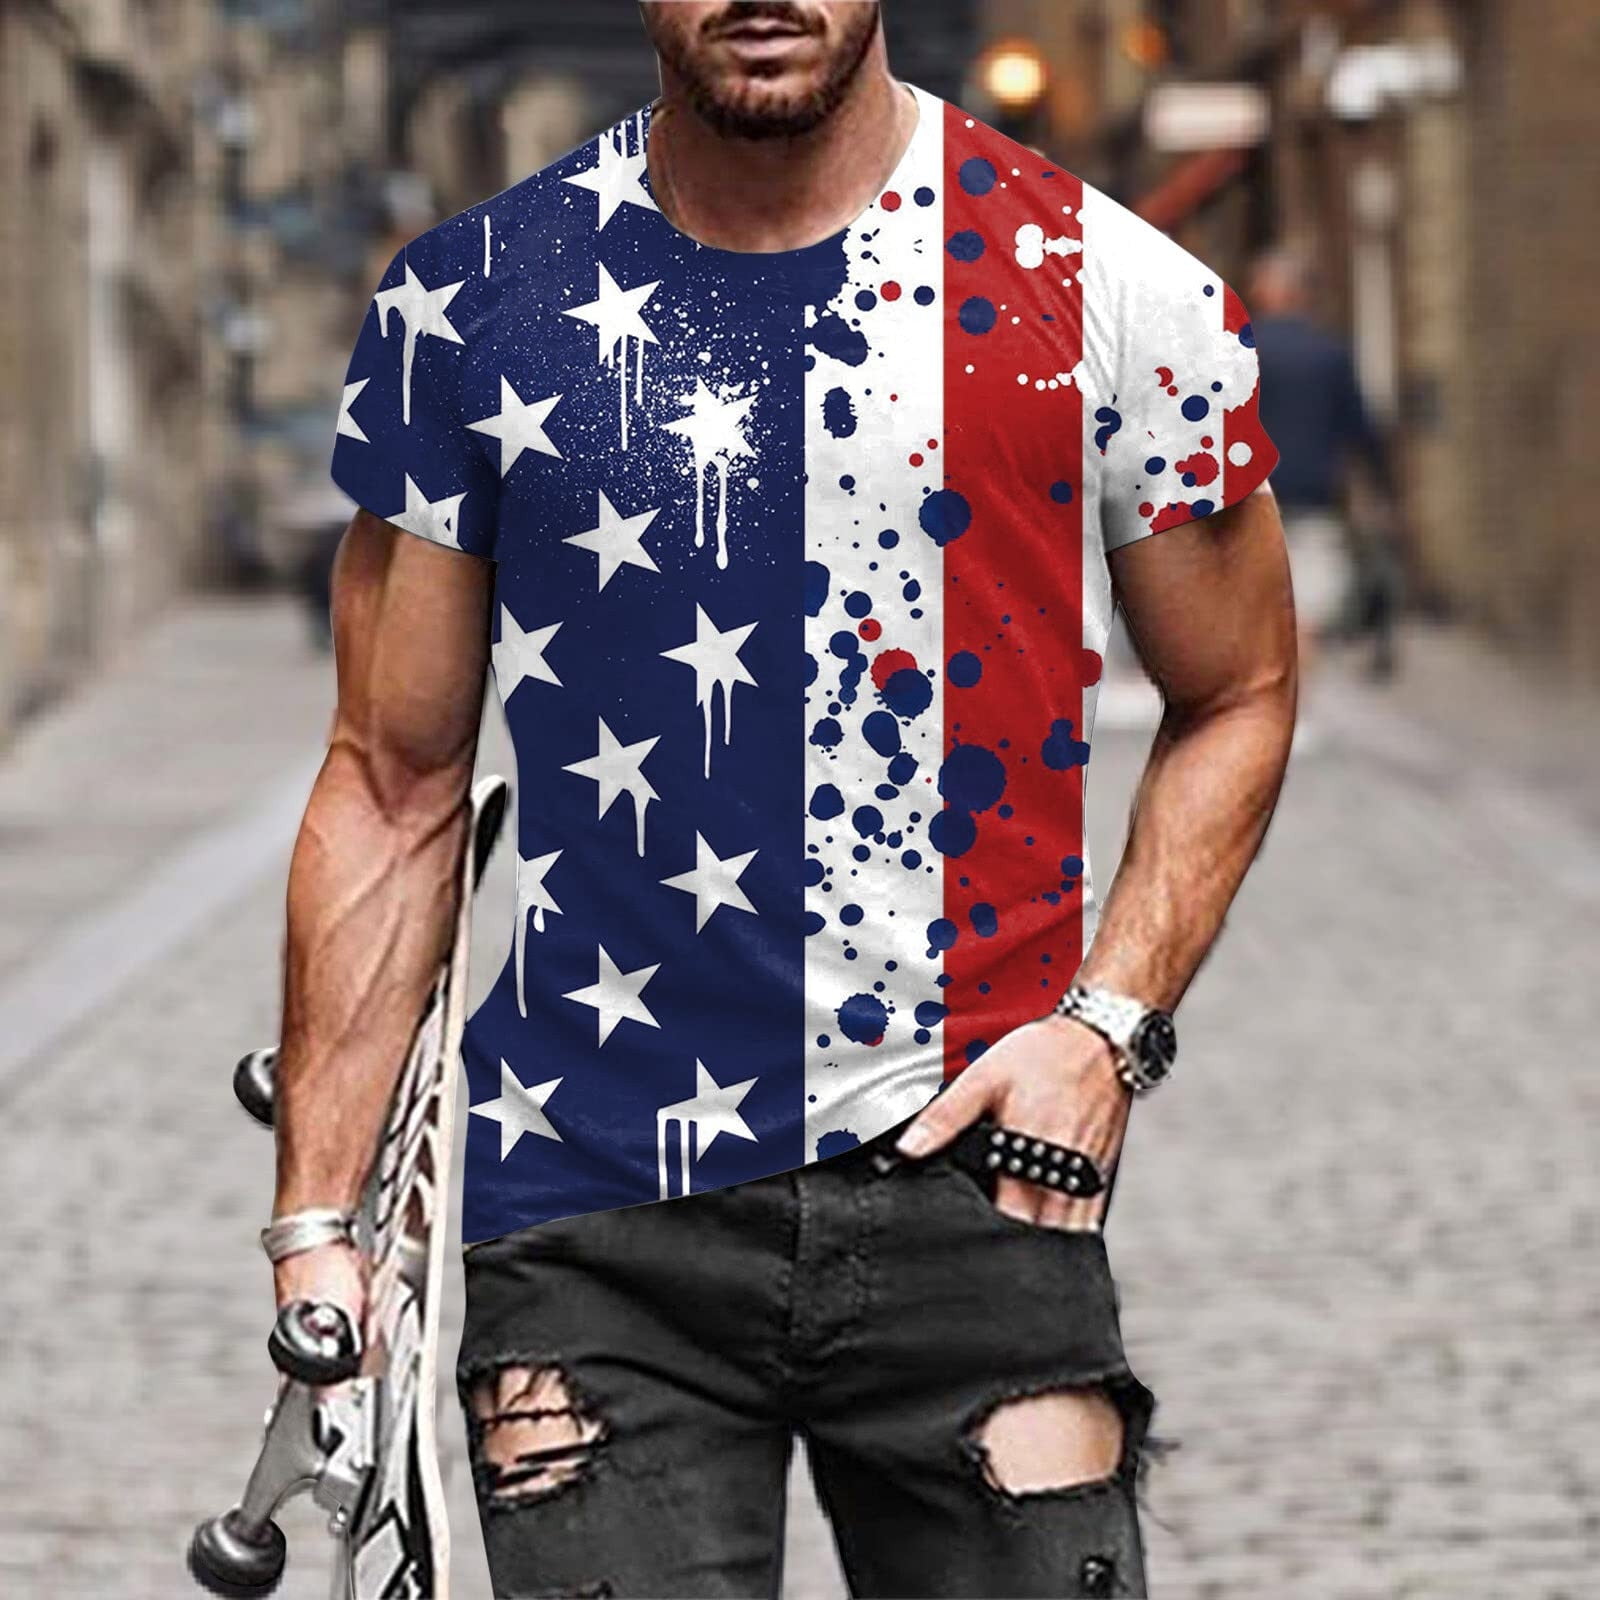 Vintage American Flag Shirts for Men 4th of July Patriotic Graphic